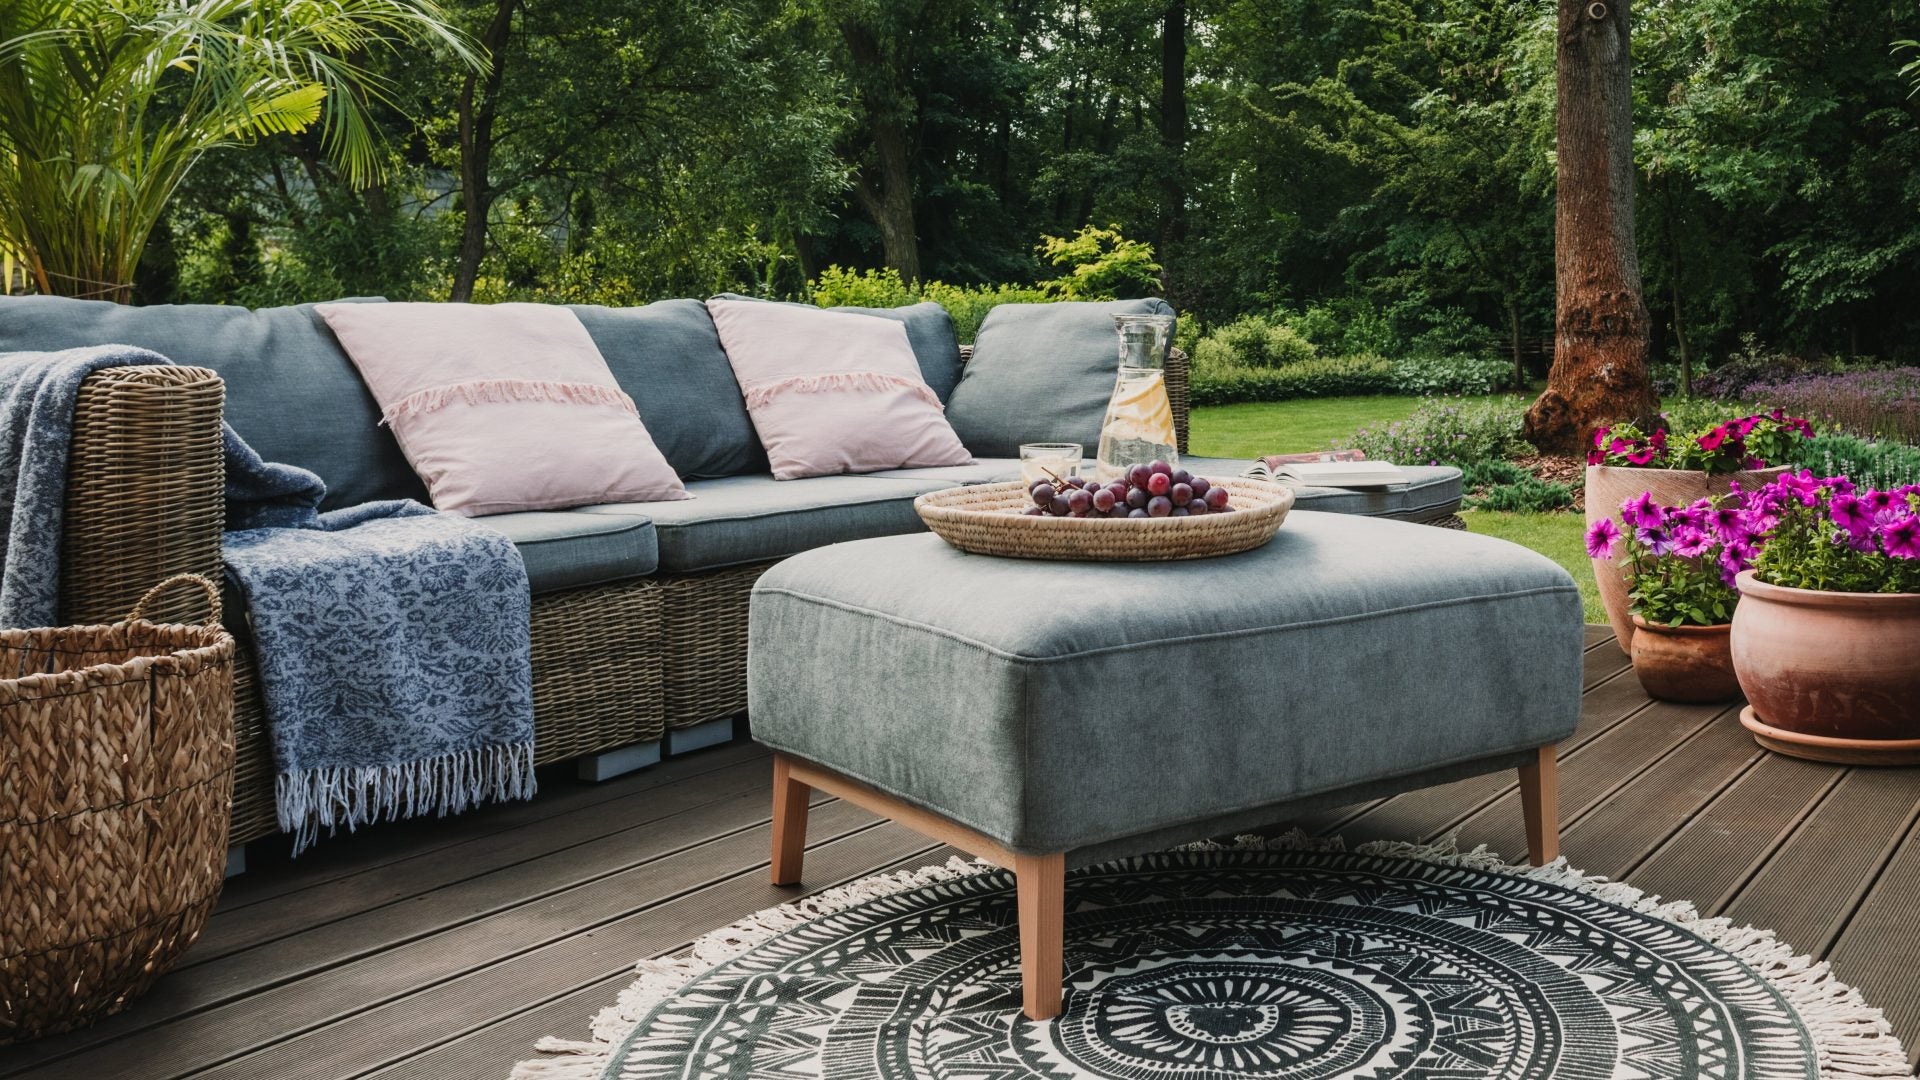 Amazon Big Spring Sale: The Best Deals On Patio Furniture